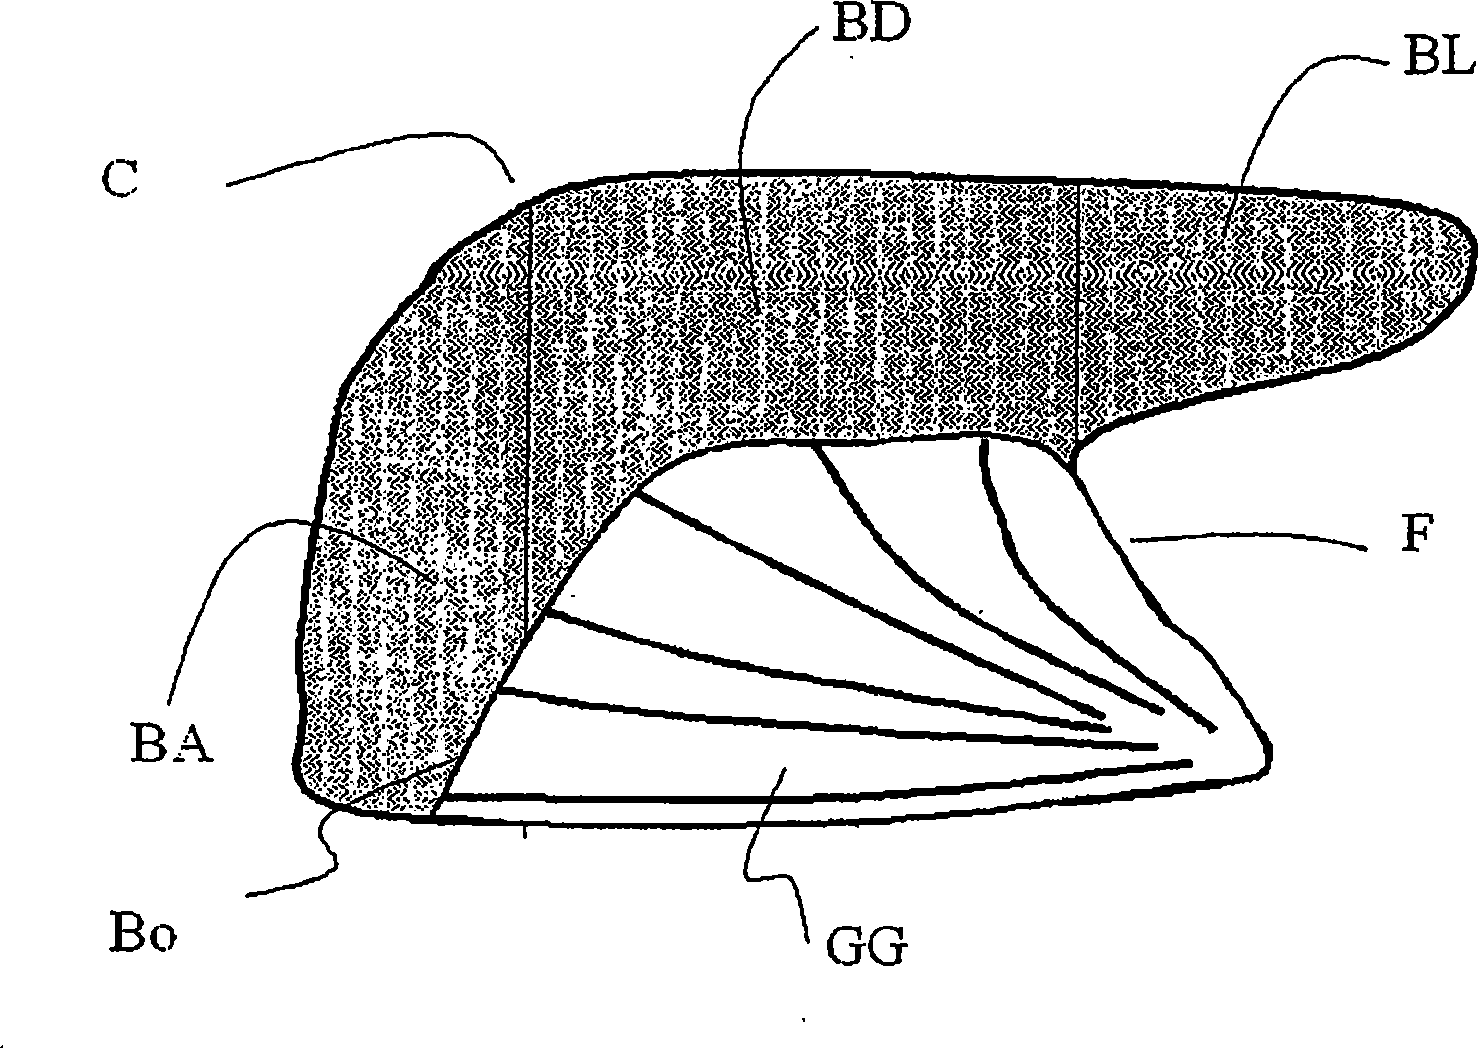 Methods and devices for treating sleep apnea and snoring